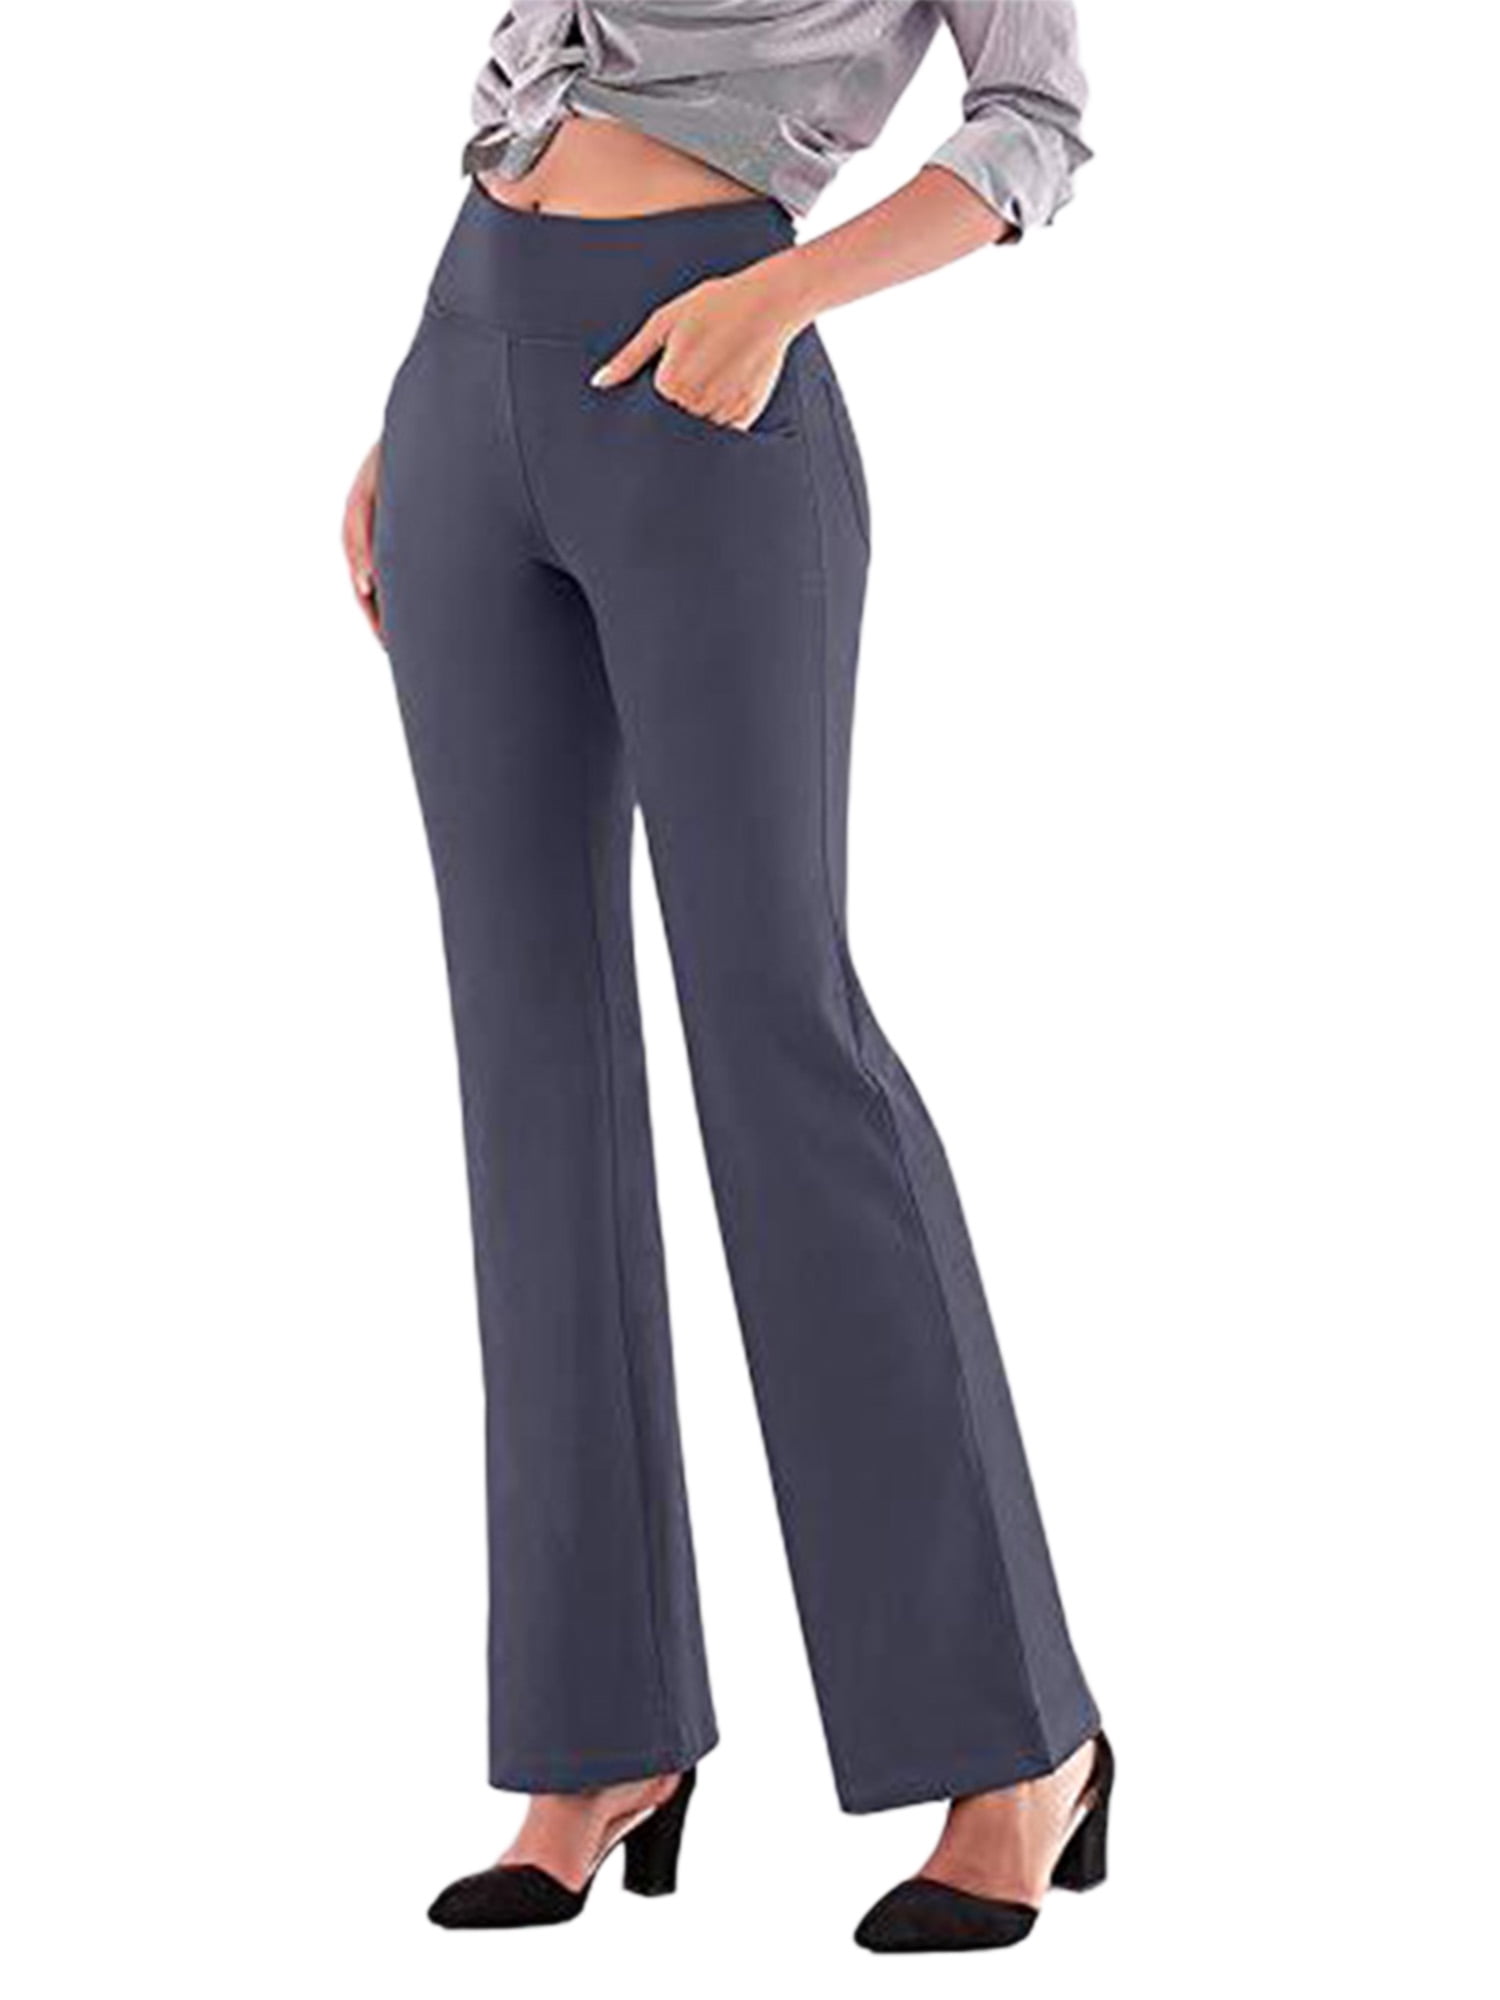 New Latest Fancy Pant for Womens Yoga Dress Pants Stretchy Work Slacks  Business Casual Office Straight